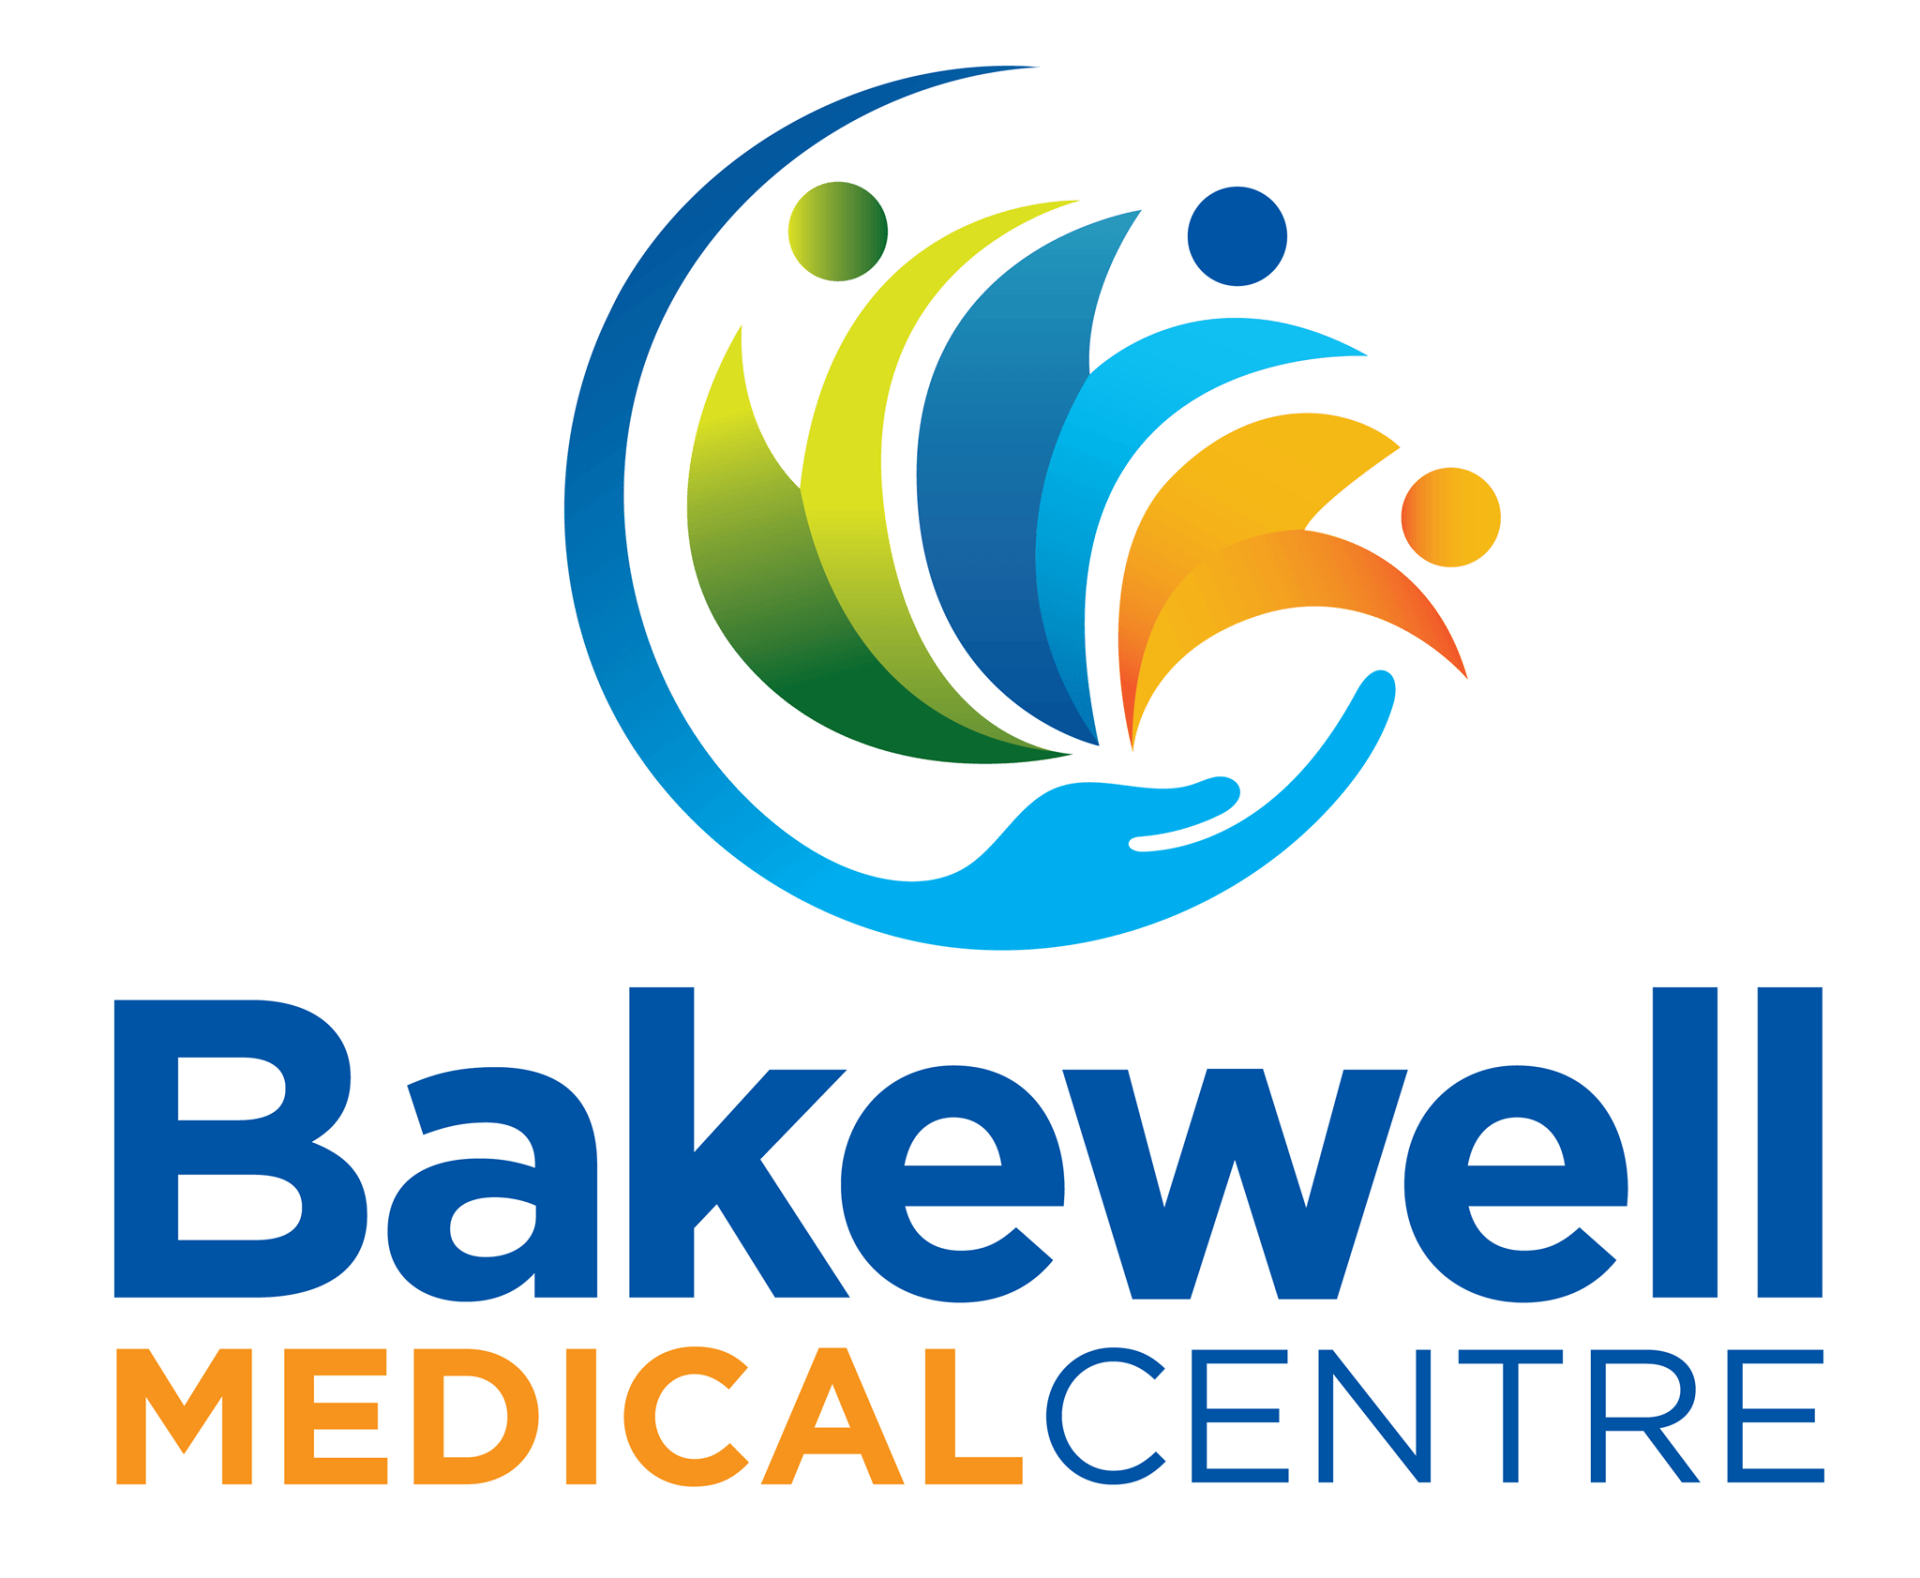 Bakewell Medical Centre